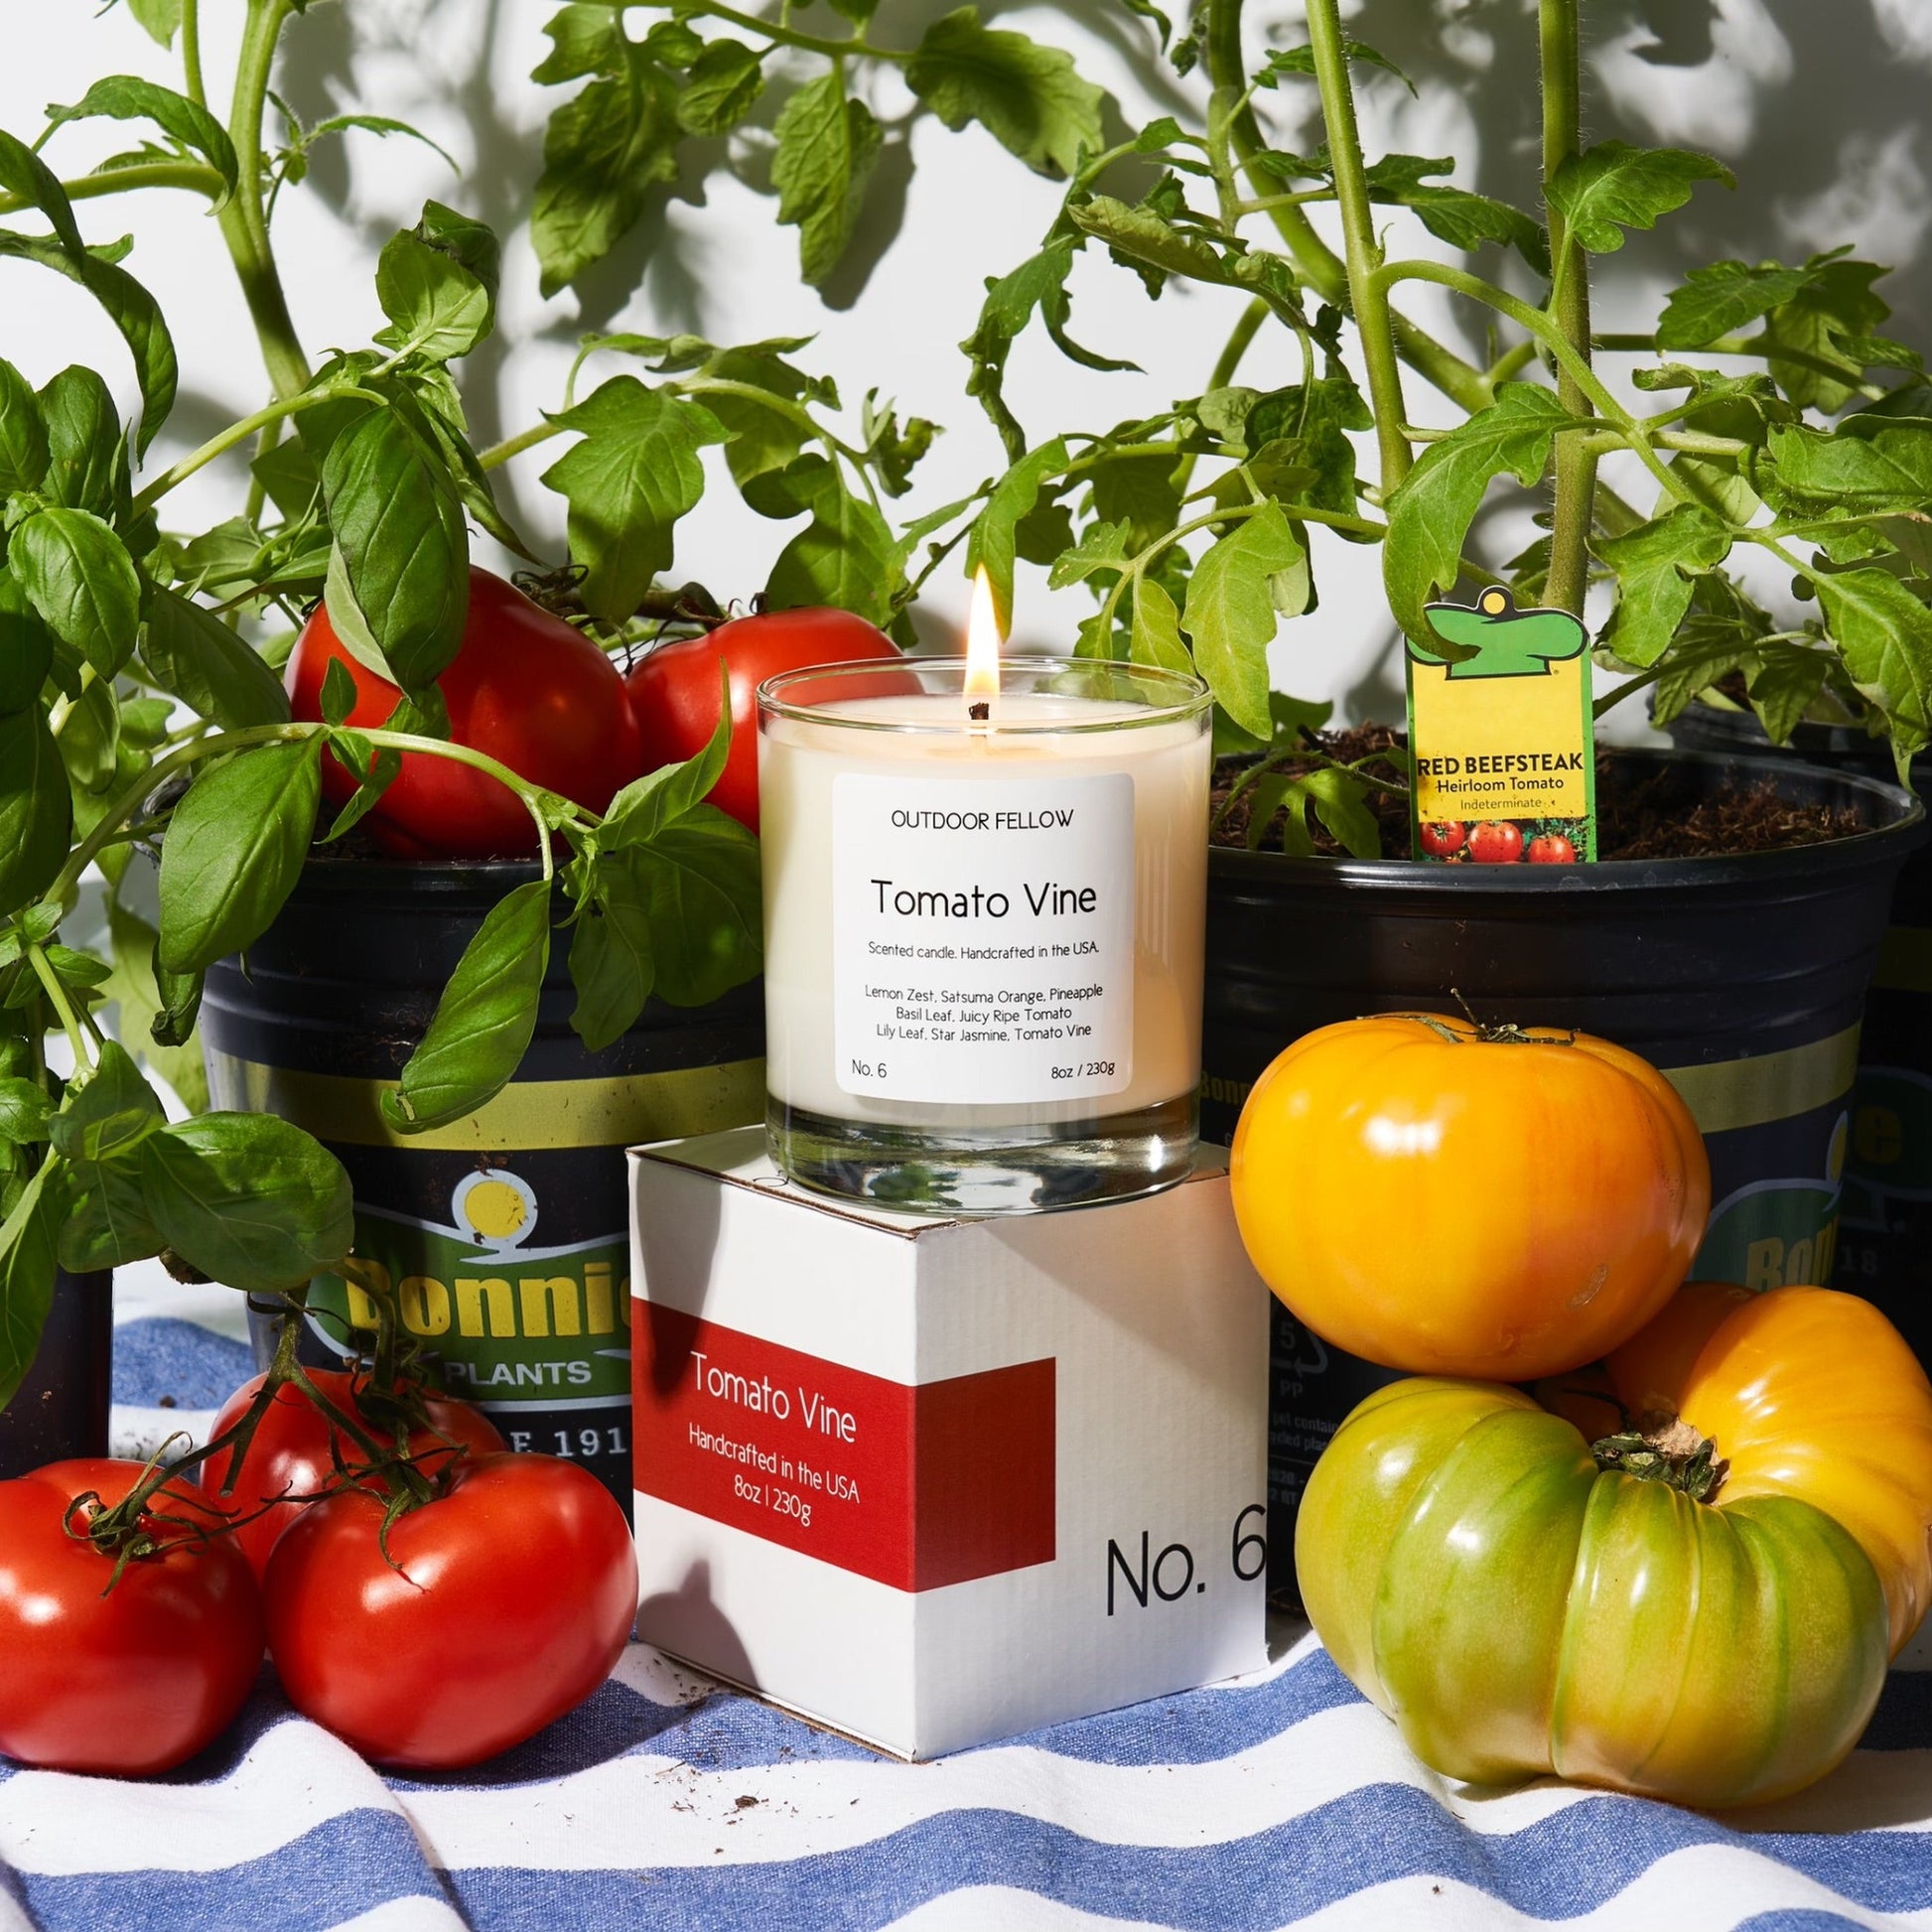 Tomato Vine candle on top of packaging surrounded by ripe tomatoes and tomato plants